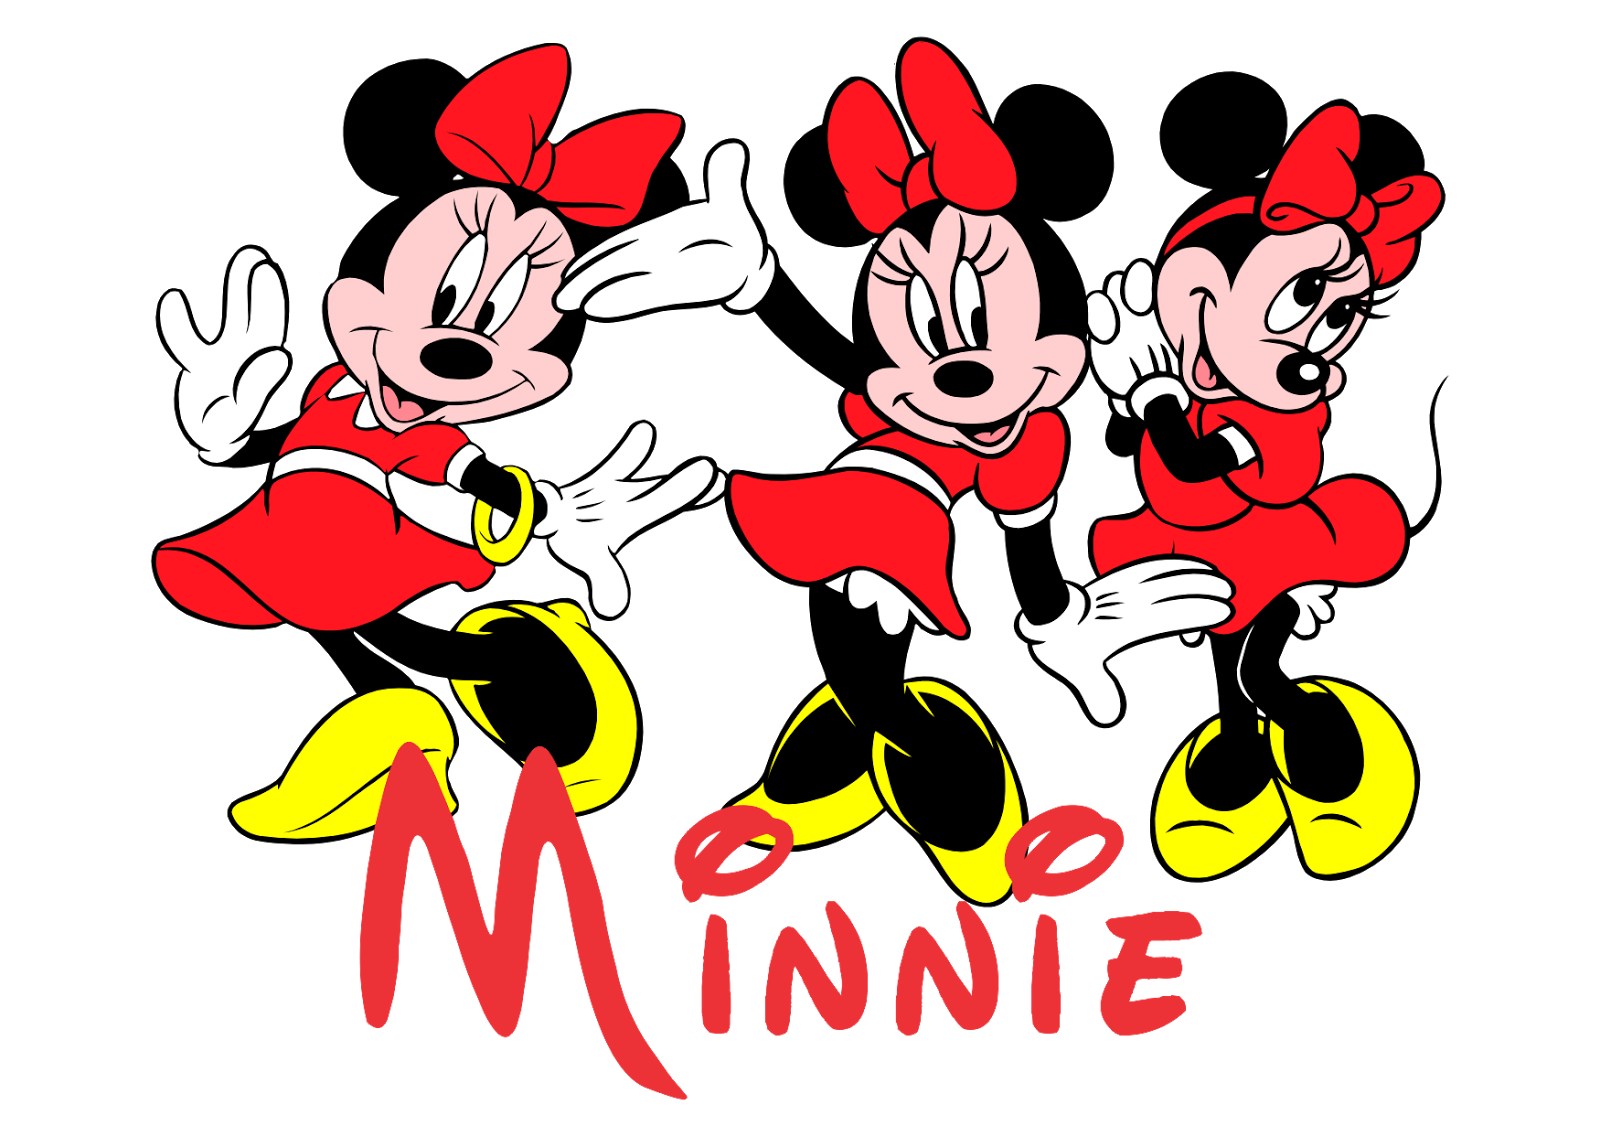 Minnie Logo Vector~ Format Cdr, Ai, Eps, Svg, PDF, PNG